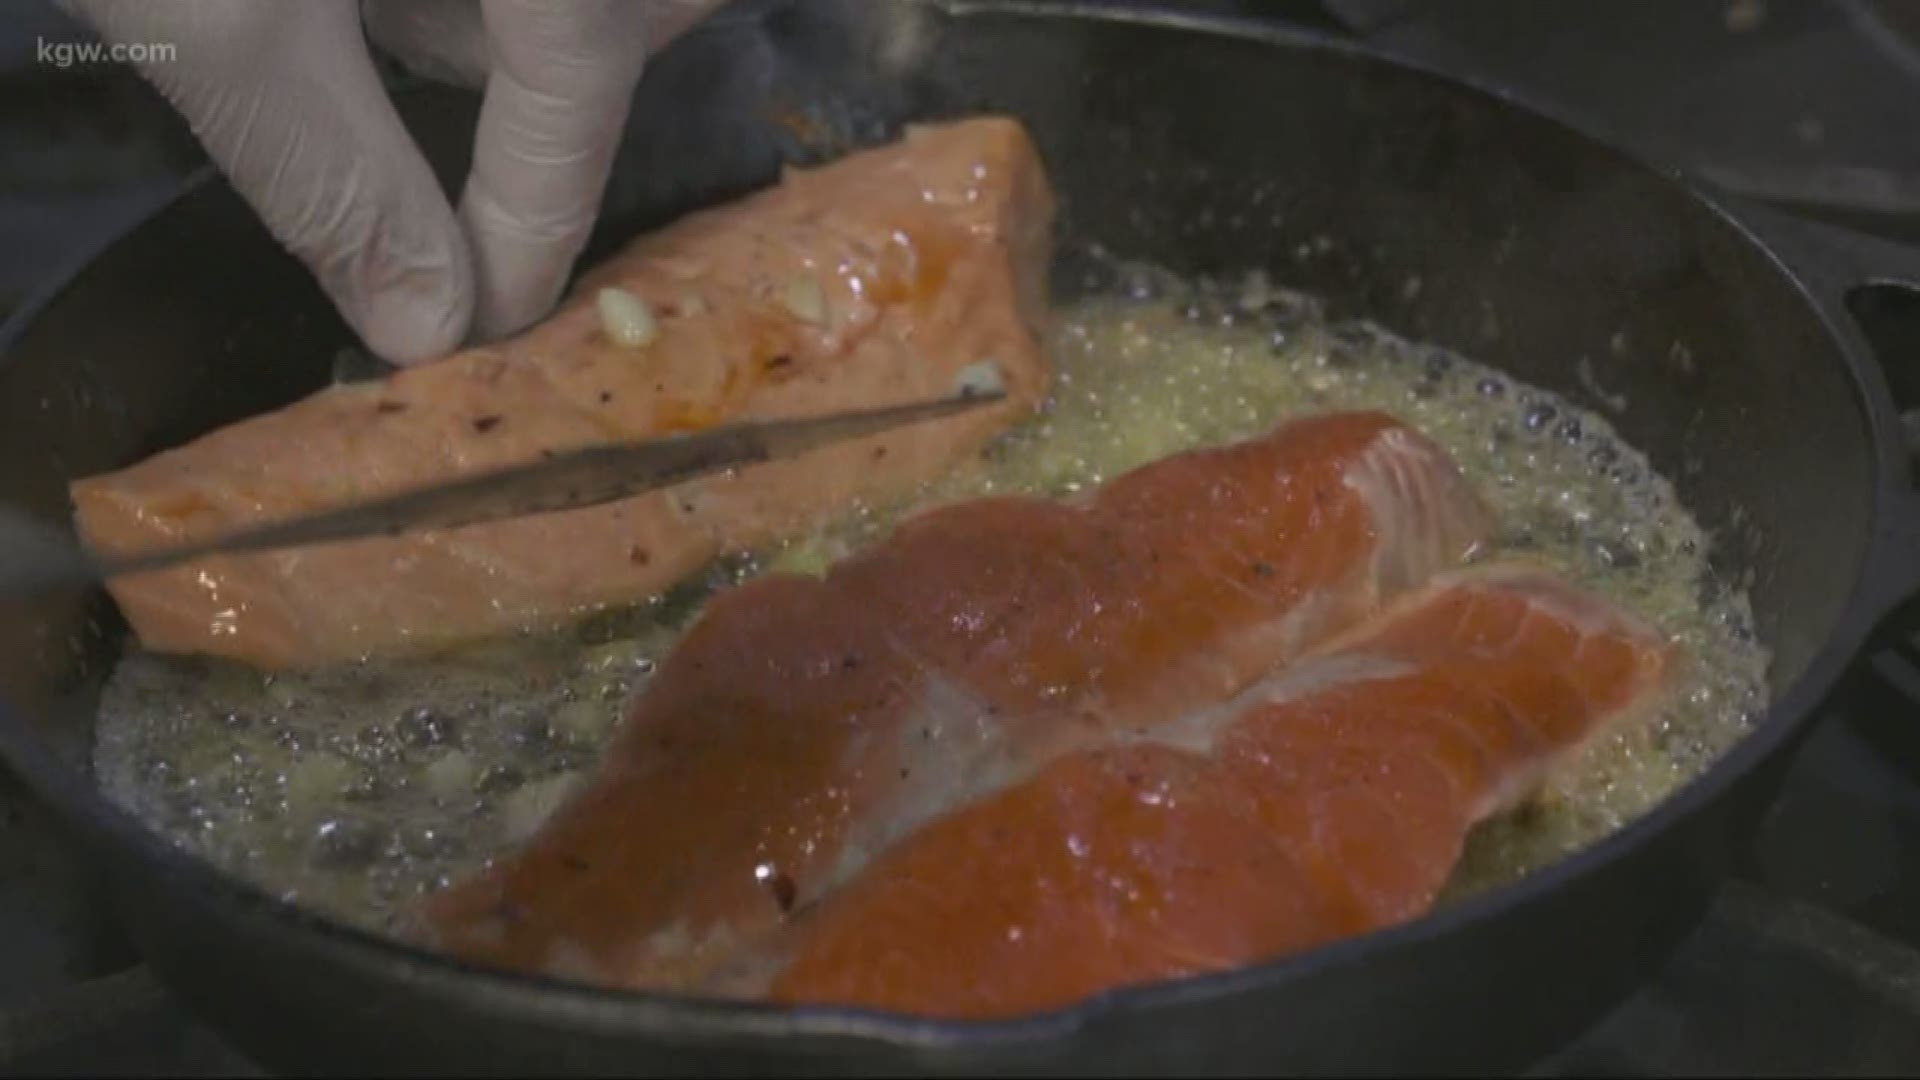 Grant McOmie introduces us to the Bridgeport Bistro in Astoria, and some tasty ways to prepare salmon and crab.